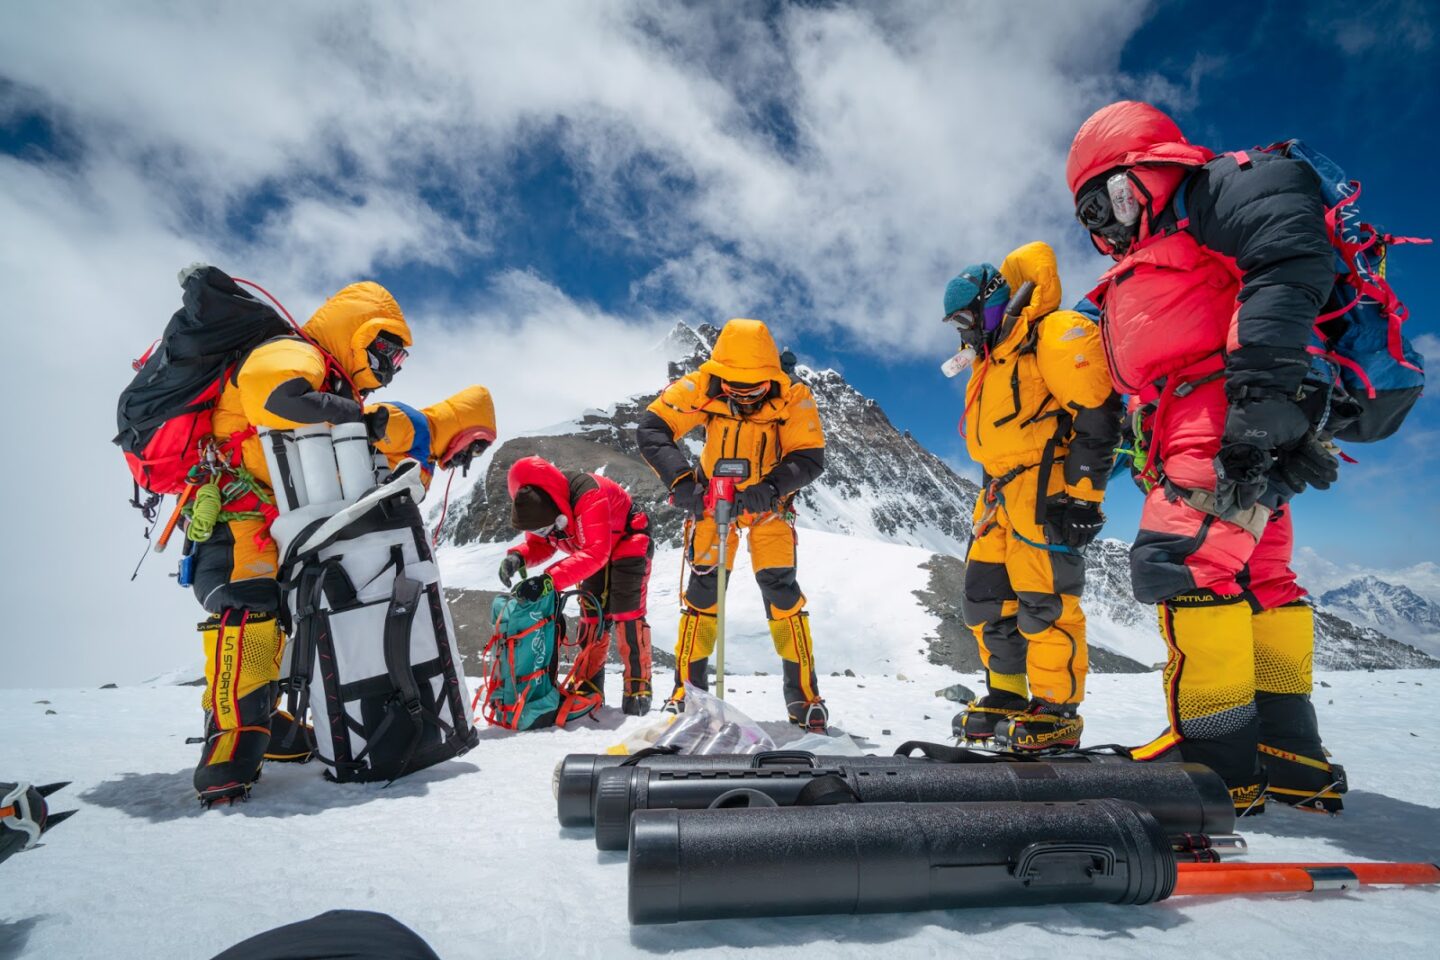 Mariusz Potocki and Sherpa team drilling the highest ice core ever recovered at 8020m elevation with the summit of Mount Everest in the background. Dirk Collins NatGe